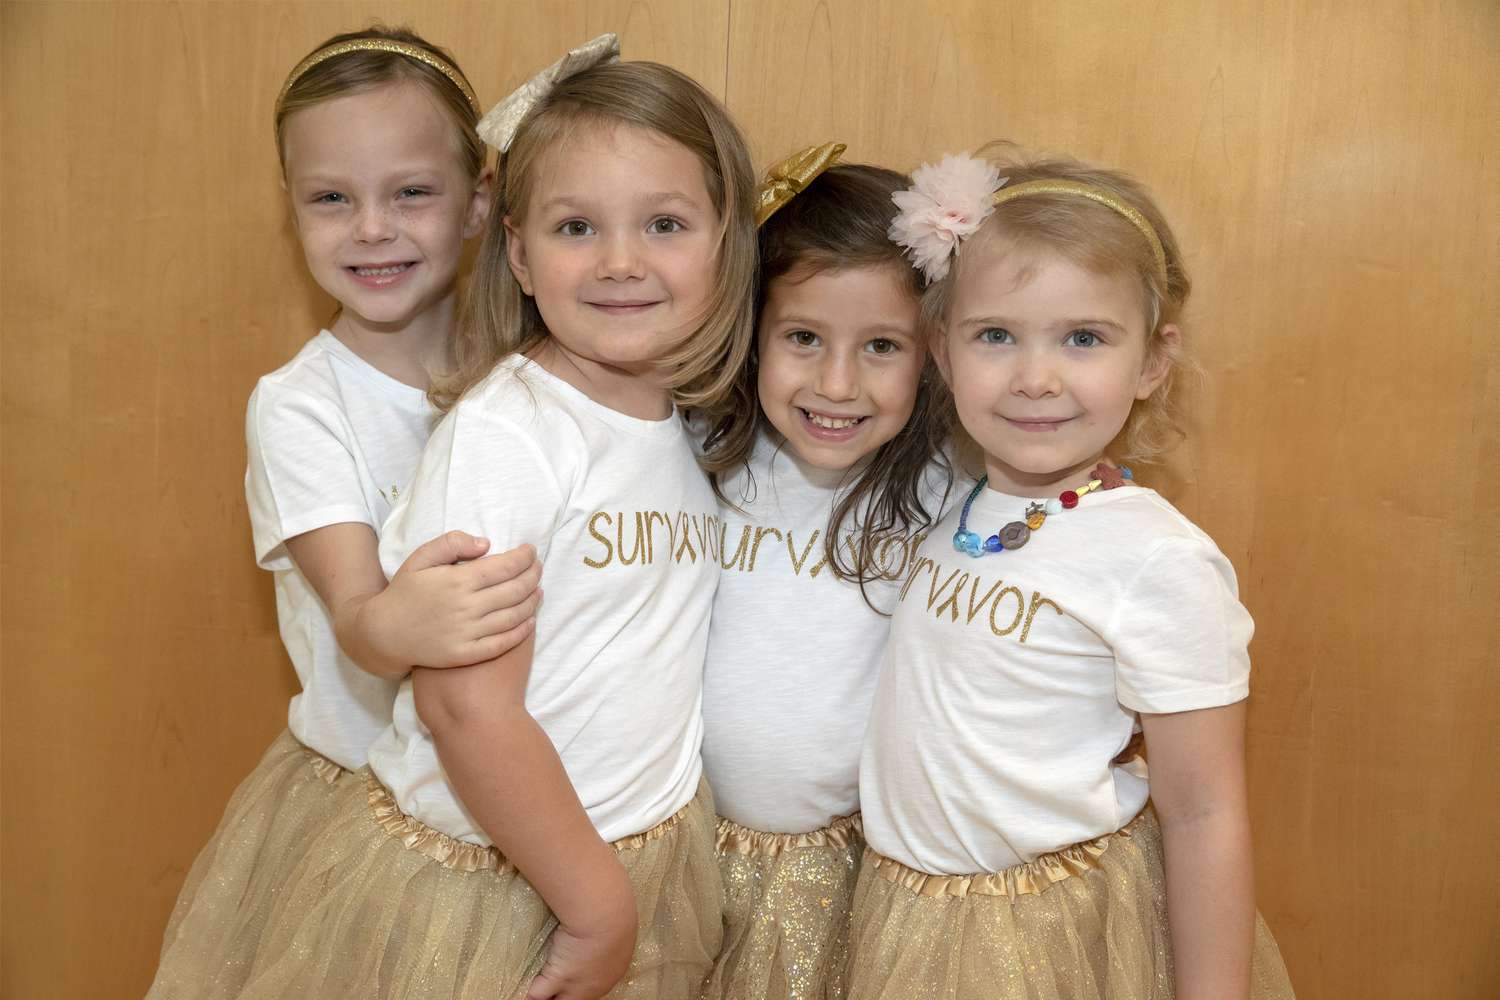 Four Girls Reunite After They Beat Cancer Together At The Same Hospital Its Amazing To See